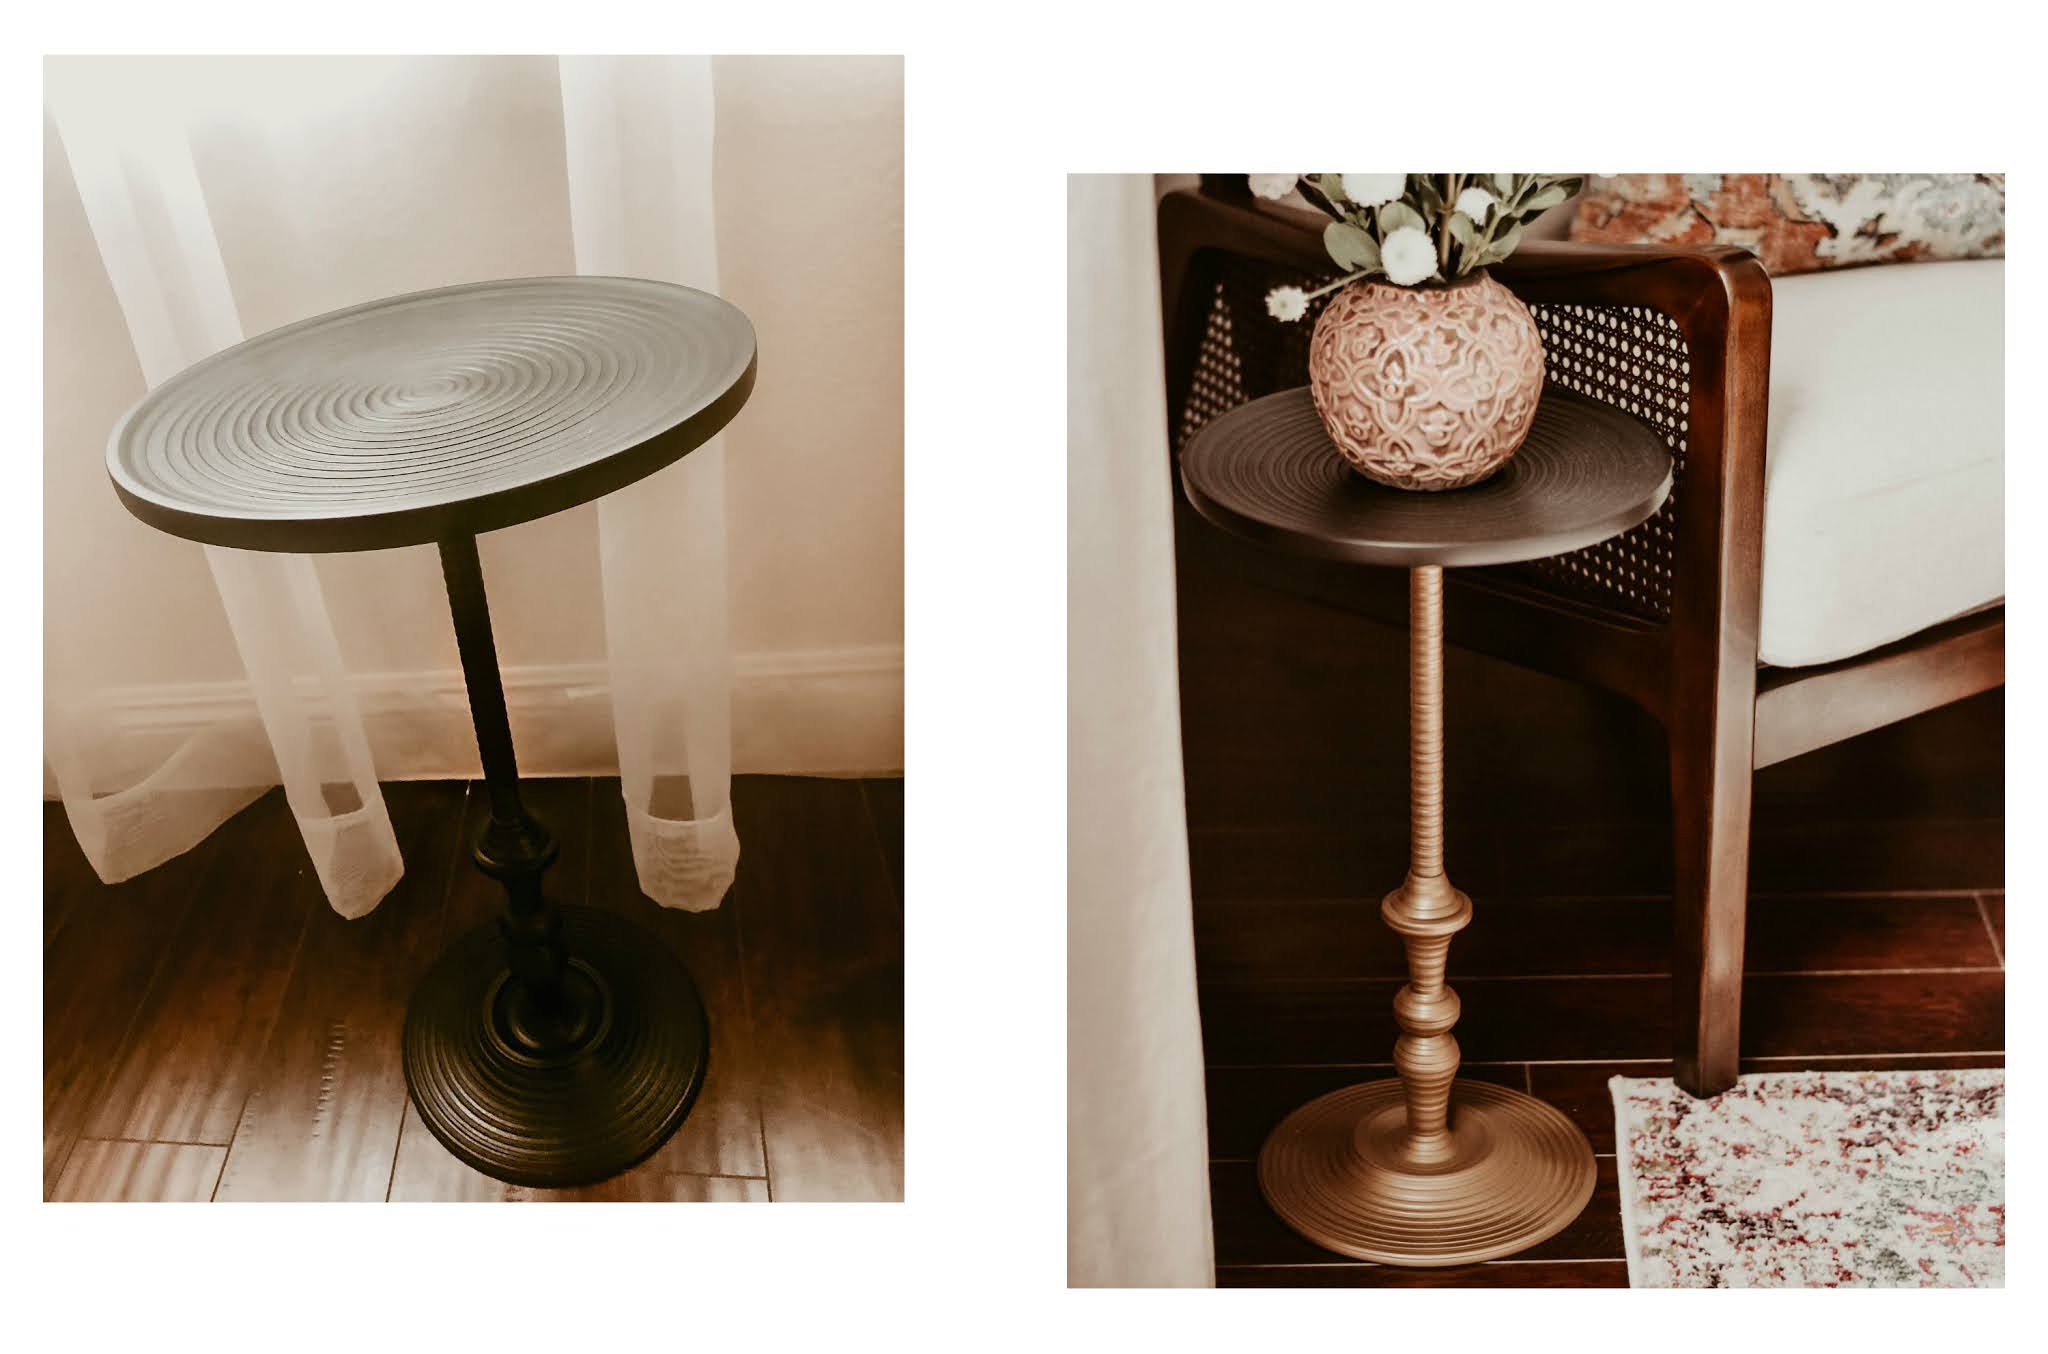 crate-and-barrel-sadie-dimunitive-side-cocktail-table-update